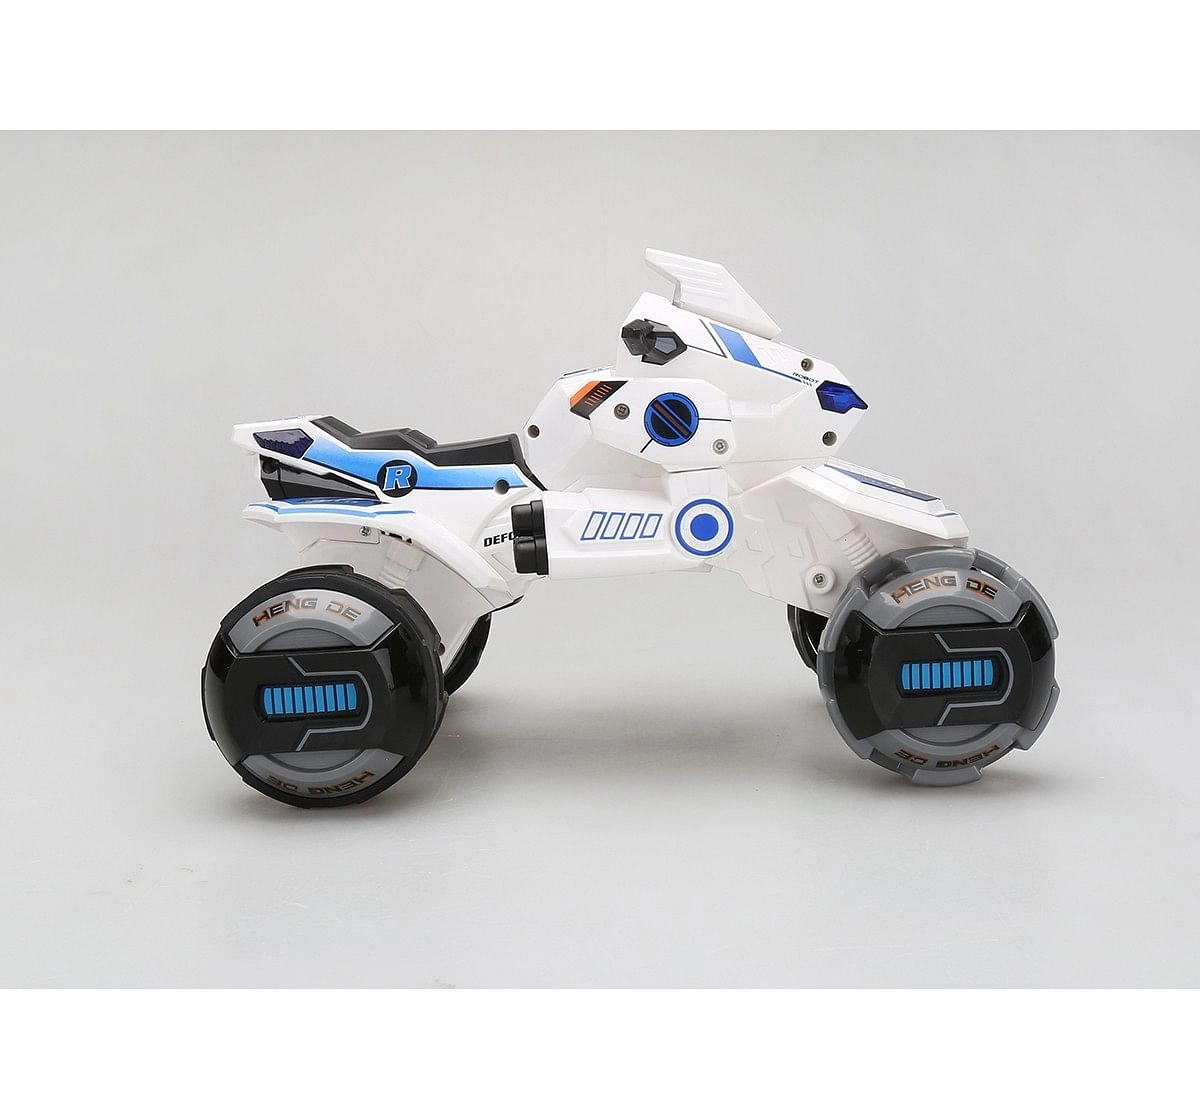 Dihua 5 Channels Transforming R/C Remote Control Toy for Kids age 6Y+ 